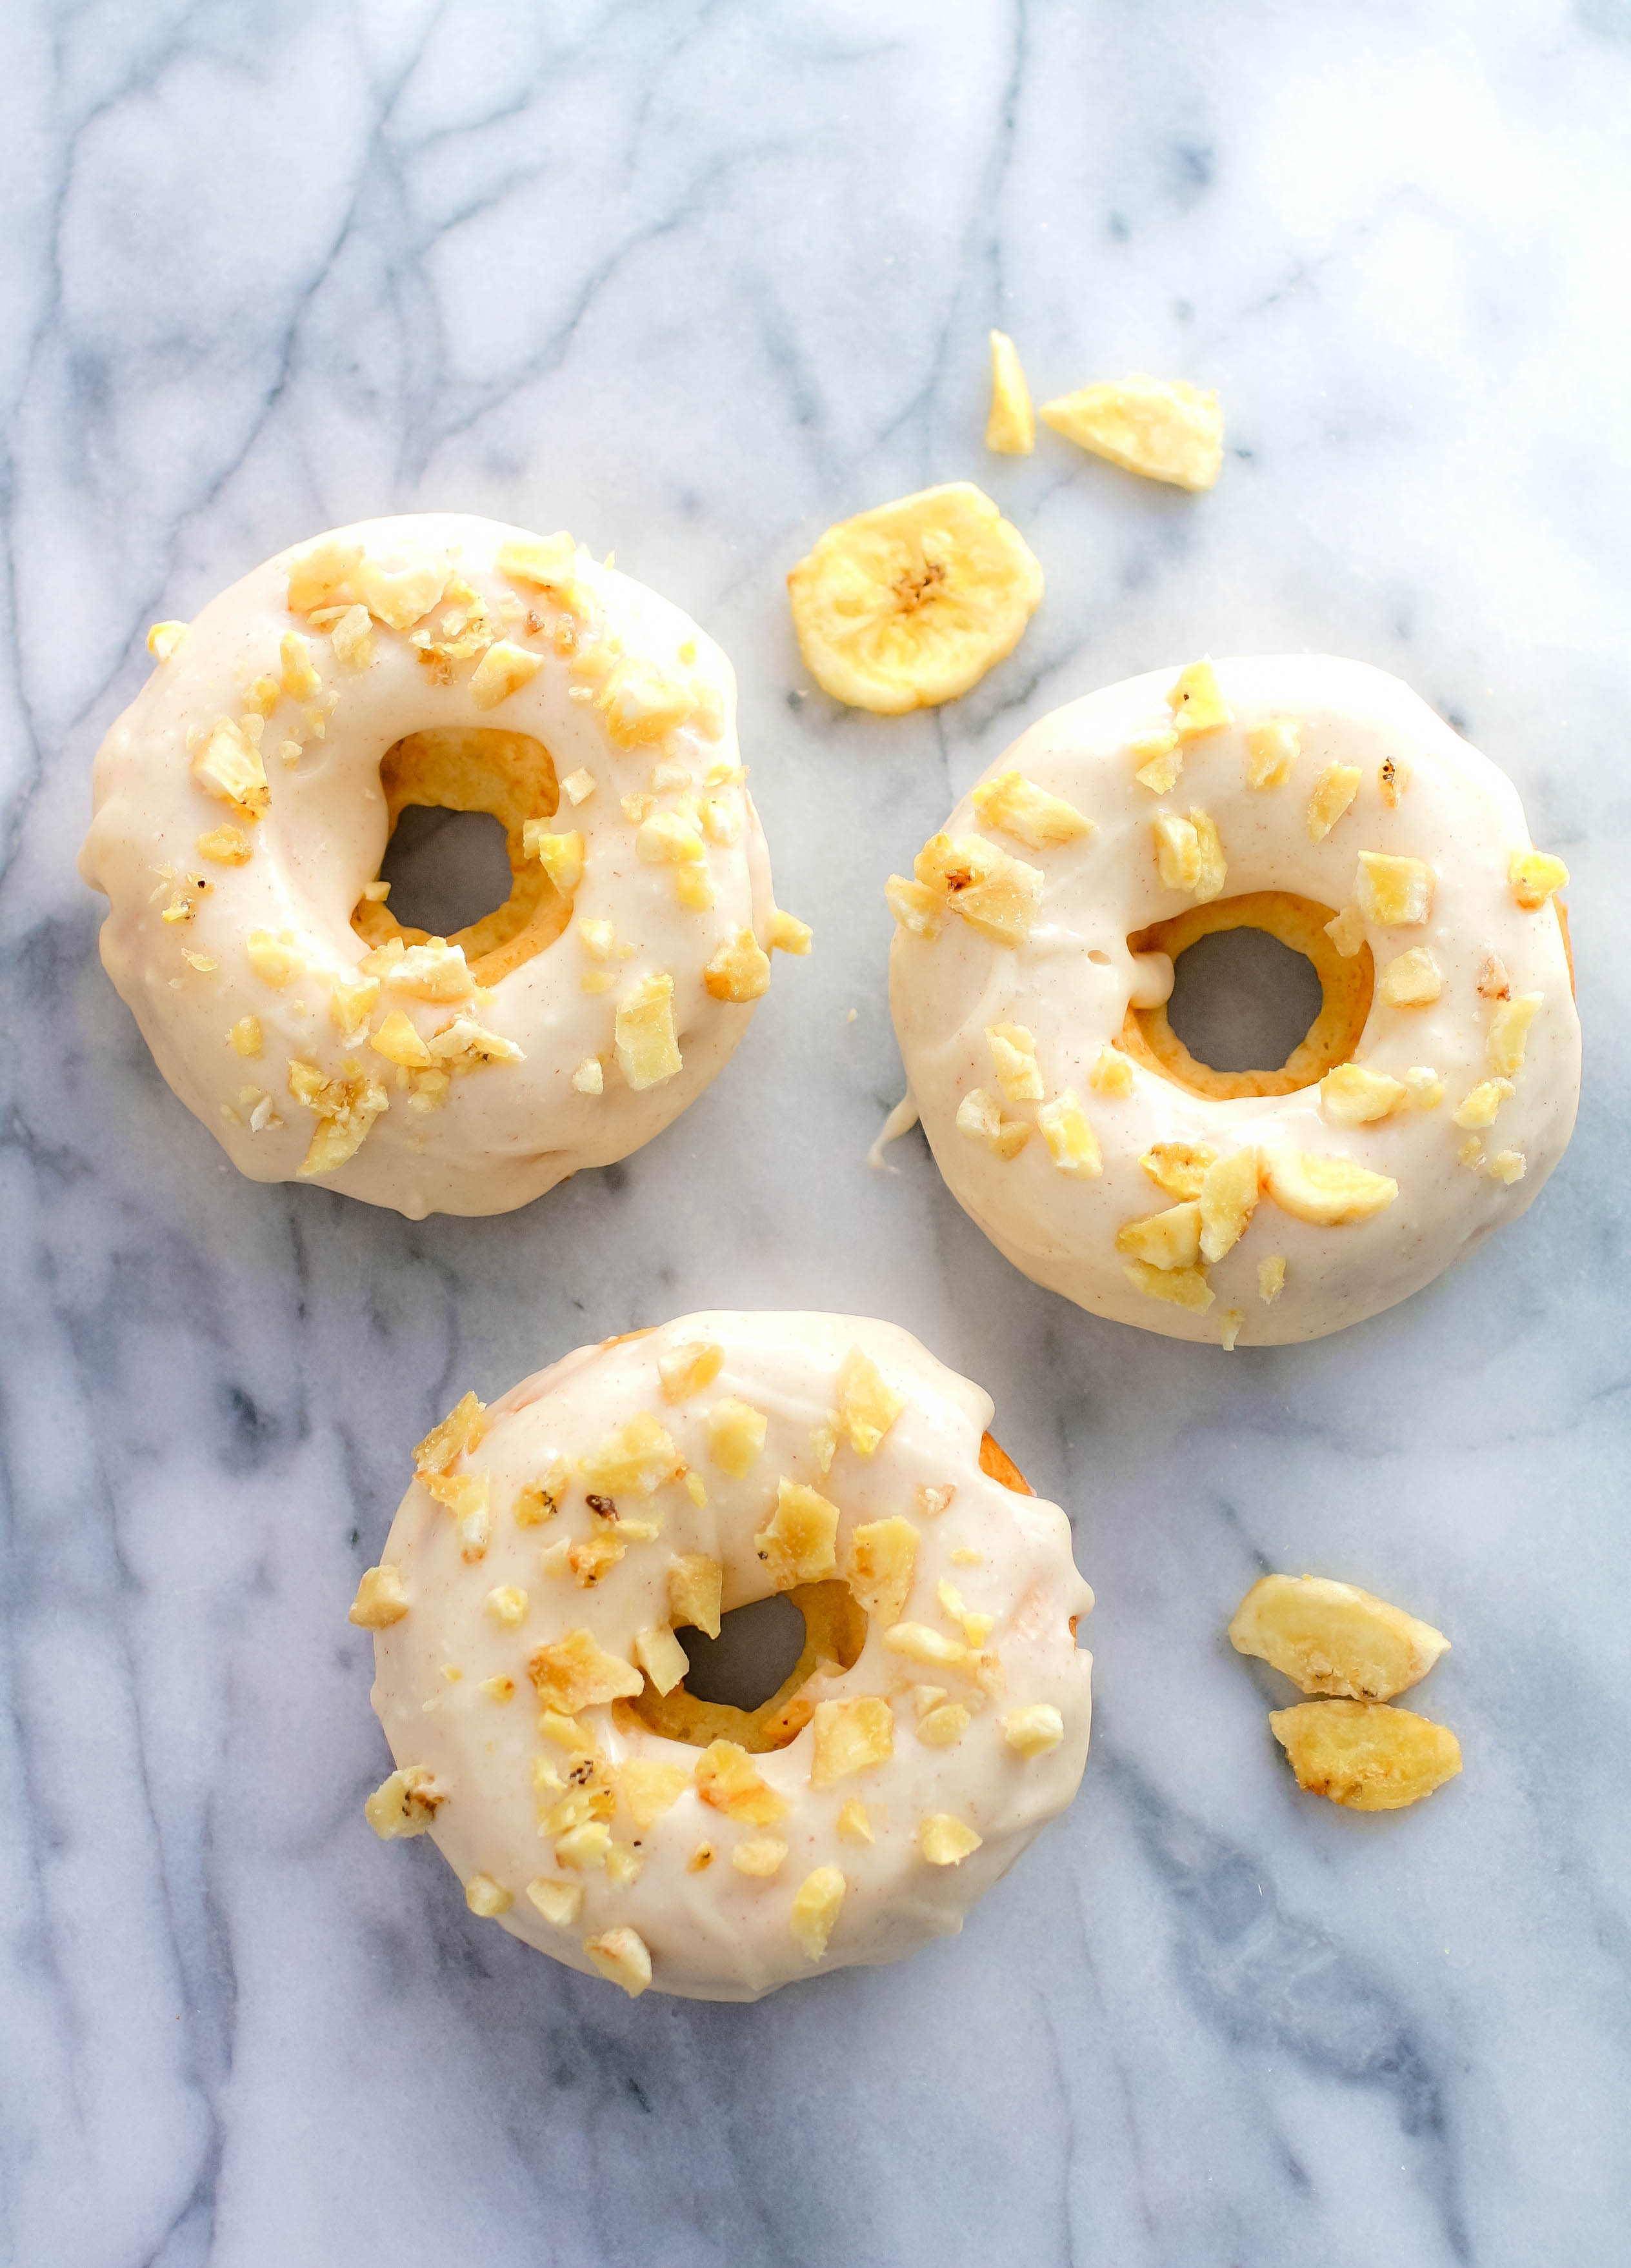 Banana Donuts with Cinnamon Cream Cheese Frosting are a fun treat for any day! These Banana Donuts with Cinnamon Cream Cheese Frosting are baked and so delicious for a fun treat!